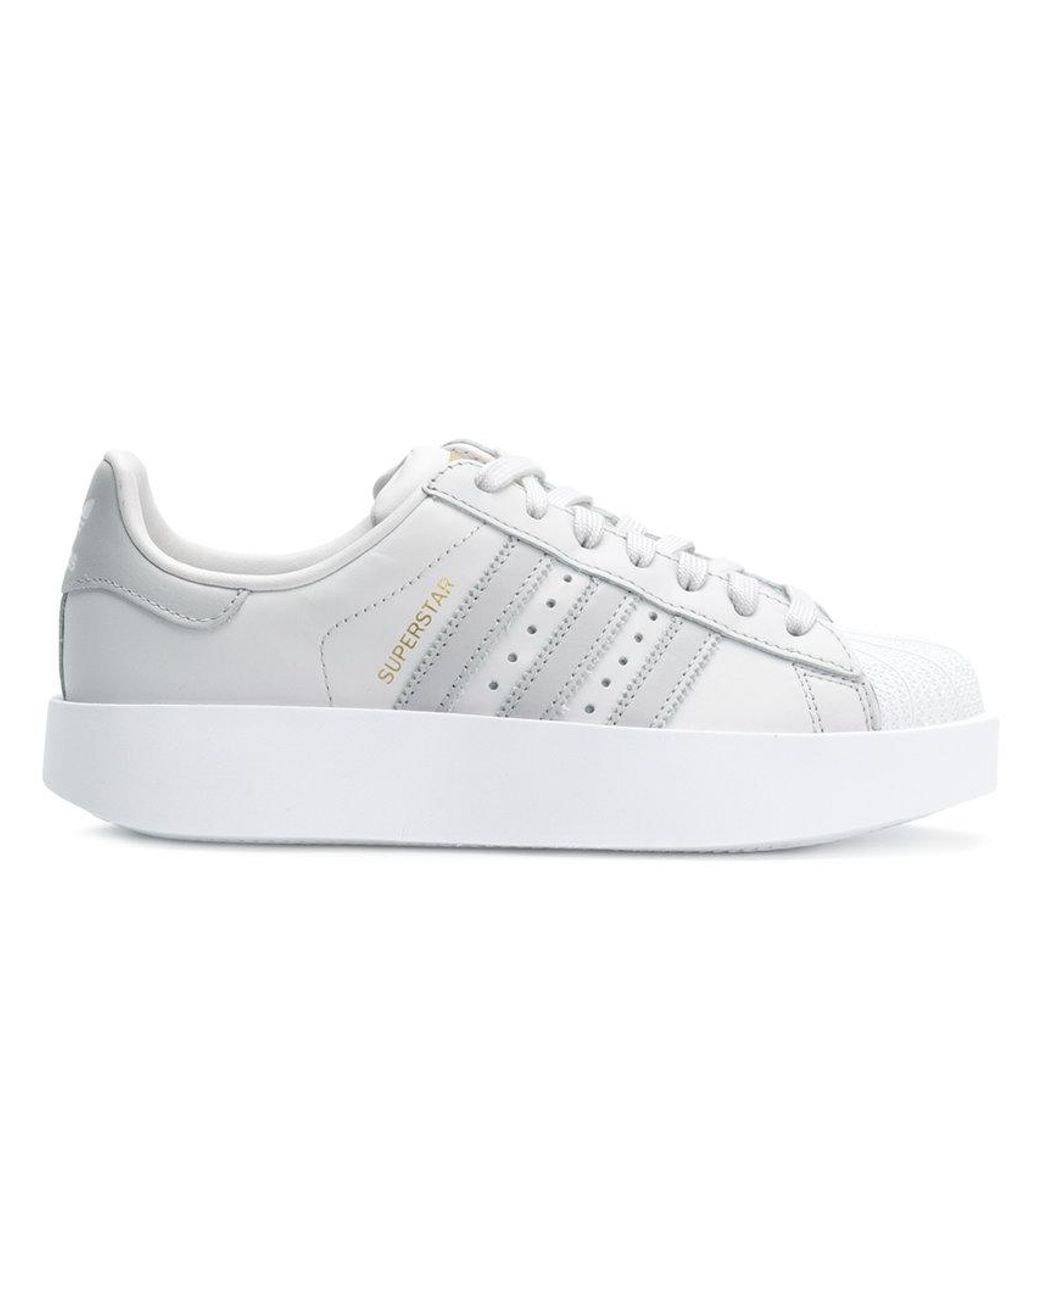 adidas Leather Superstar Bold Platform Sneakers in White | Lyst